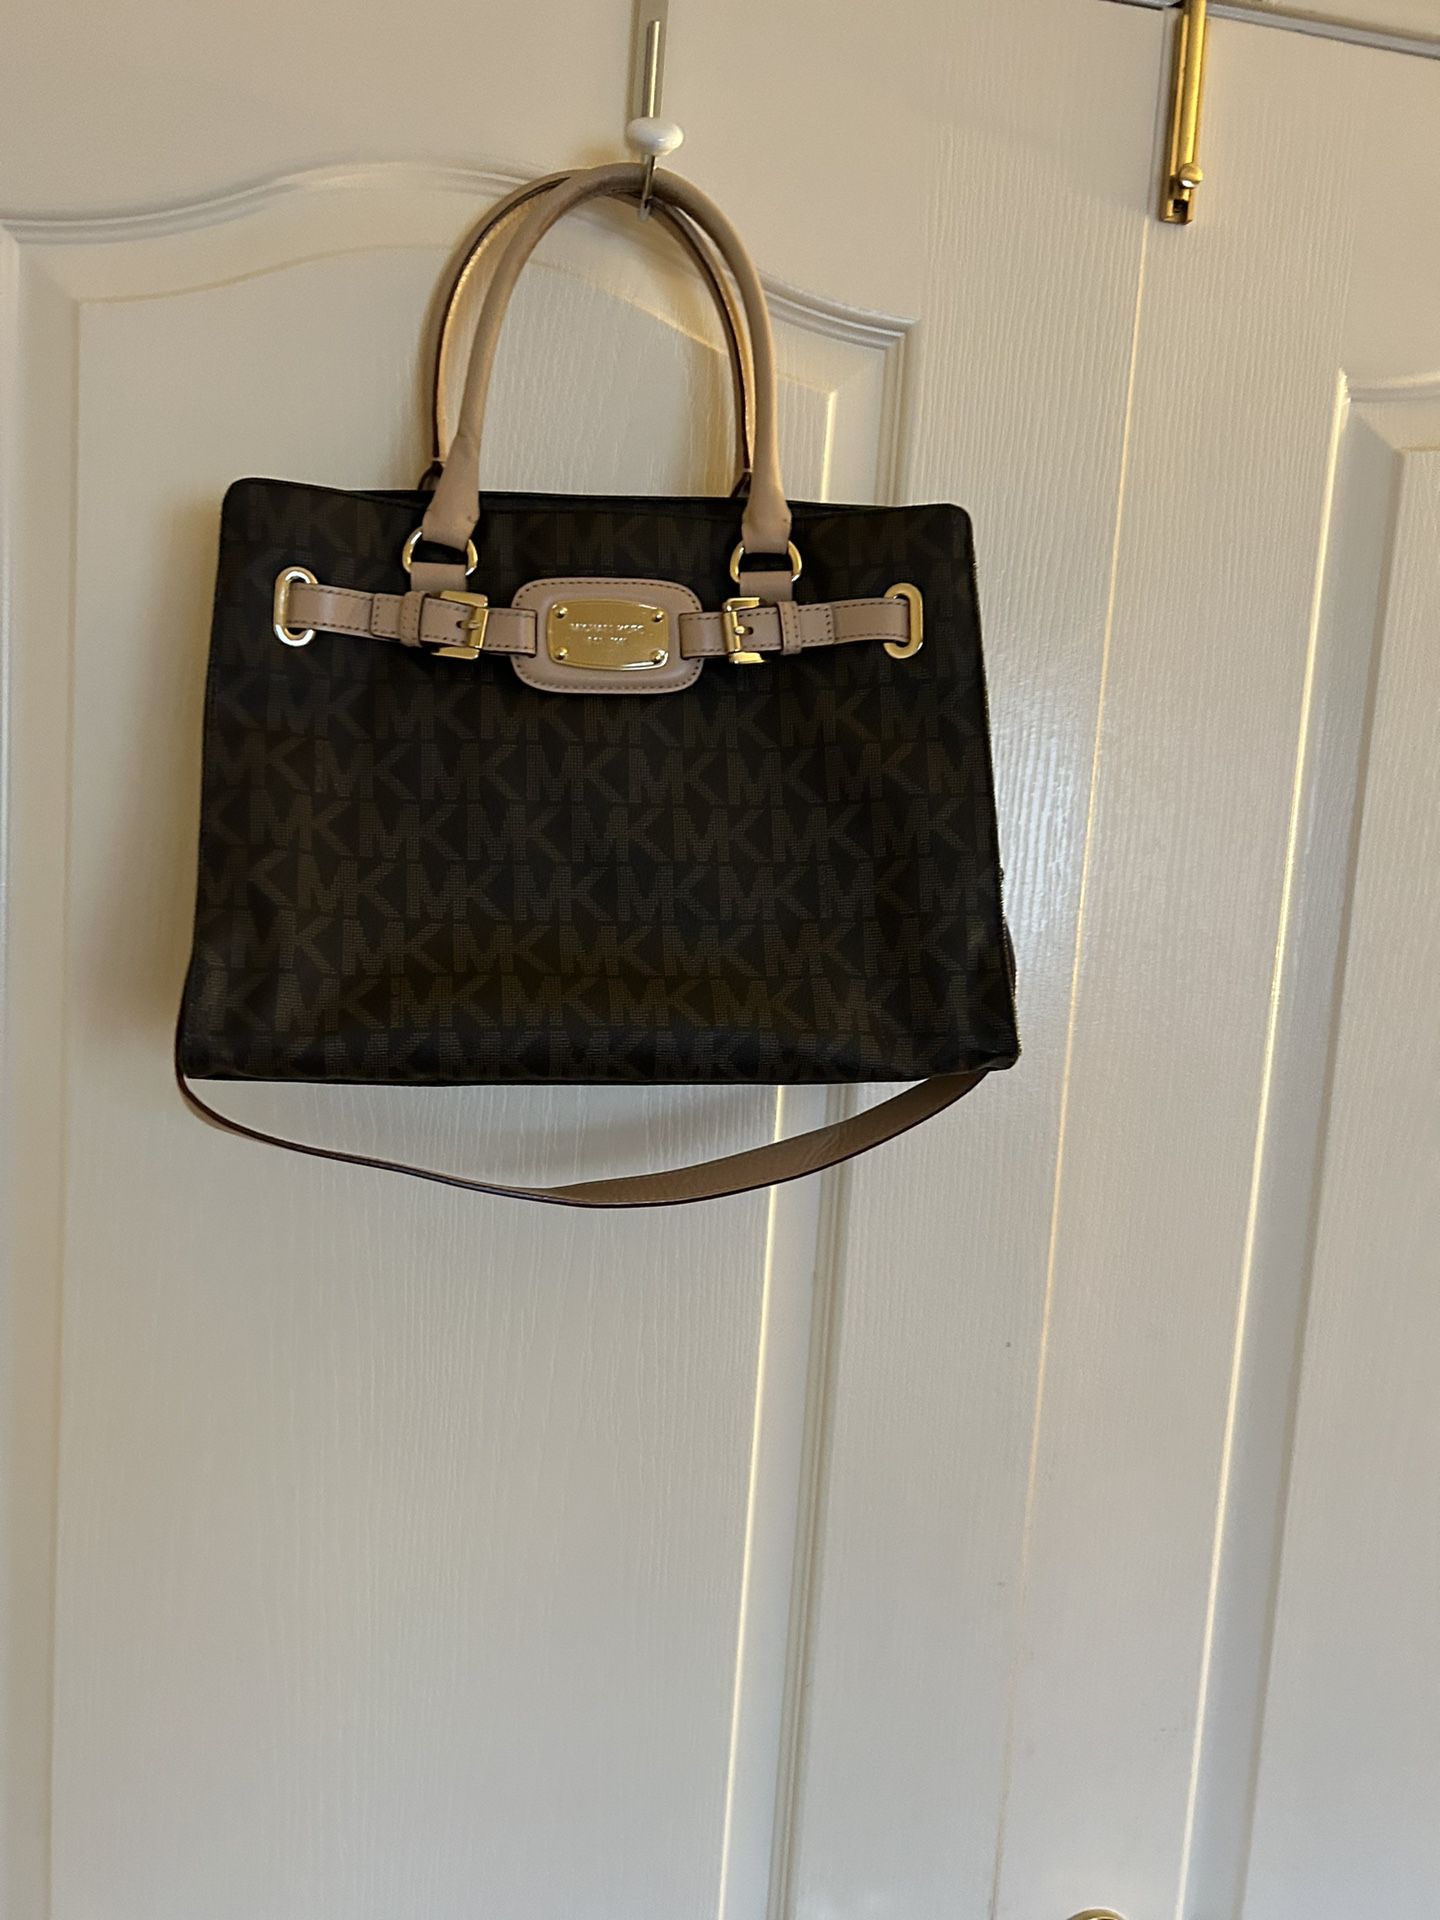 MK Bag In Excellent Condition 